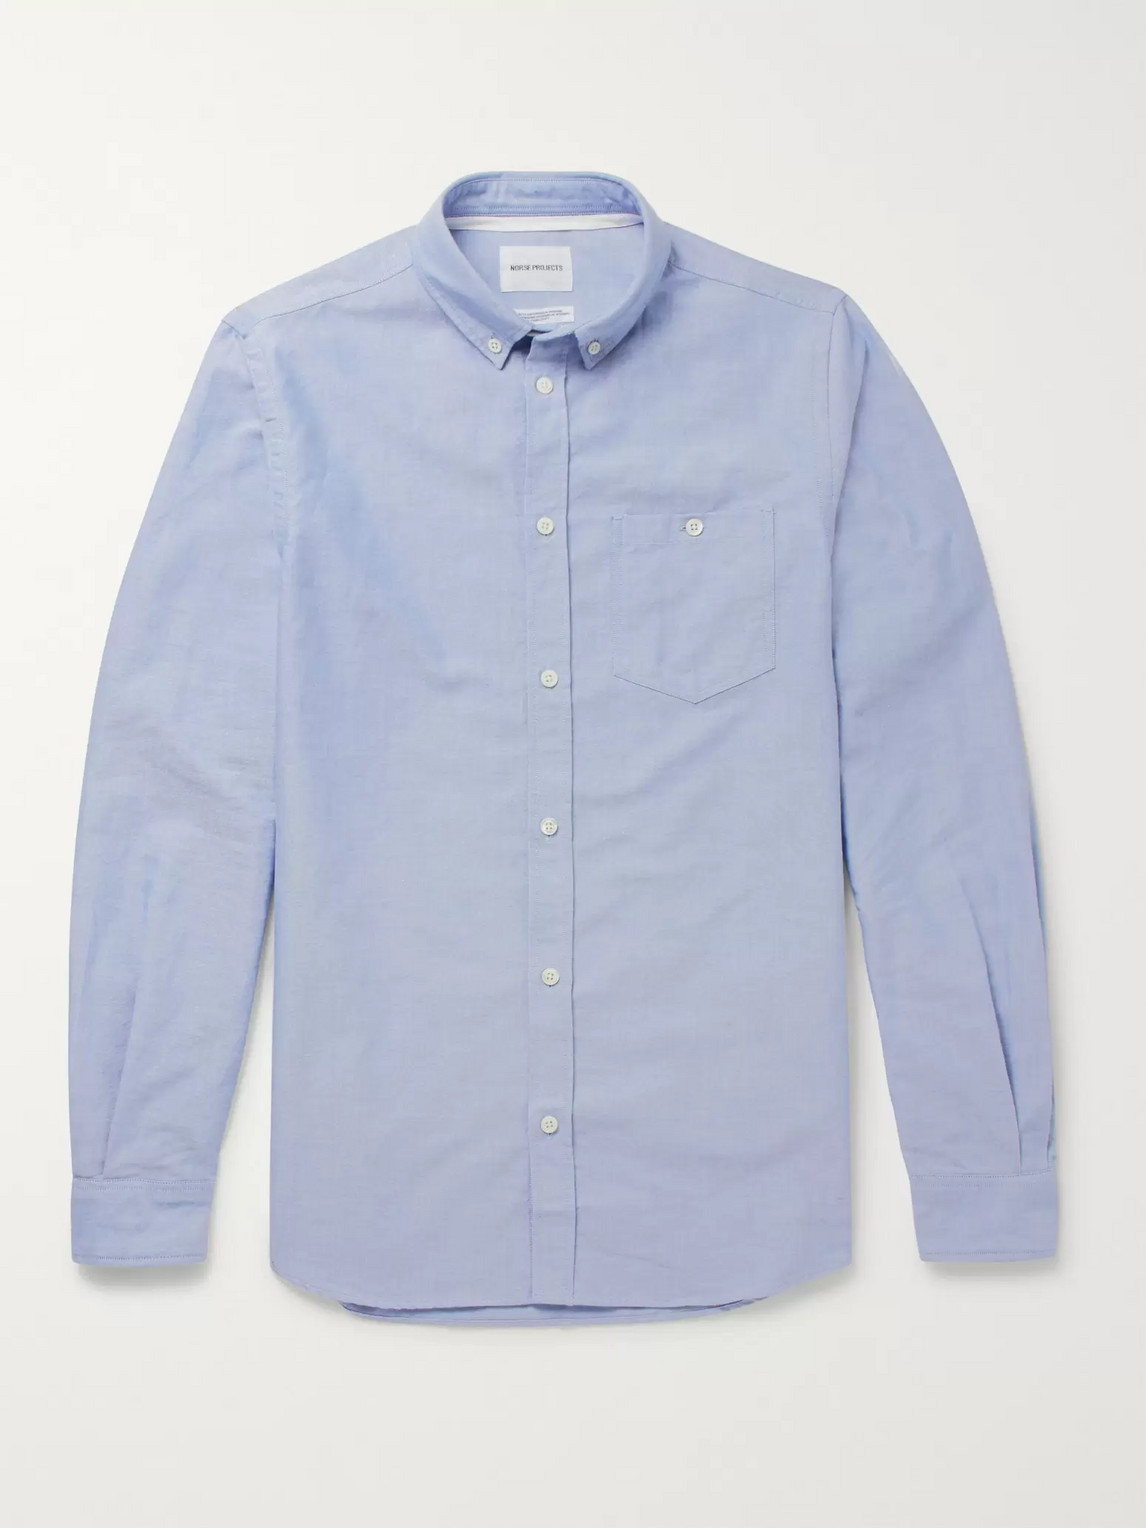 NORSE PROJECTS ANTON BUTTON-DOWN COLLAR COTTON OXFORD SHIRT